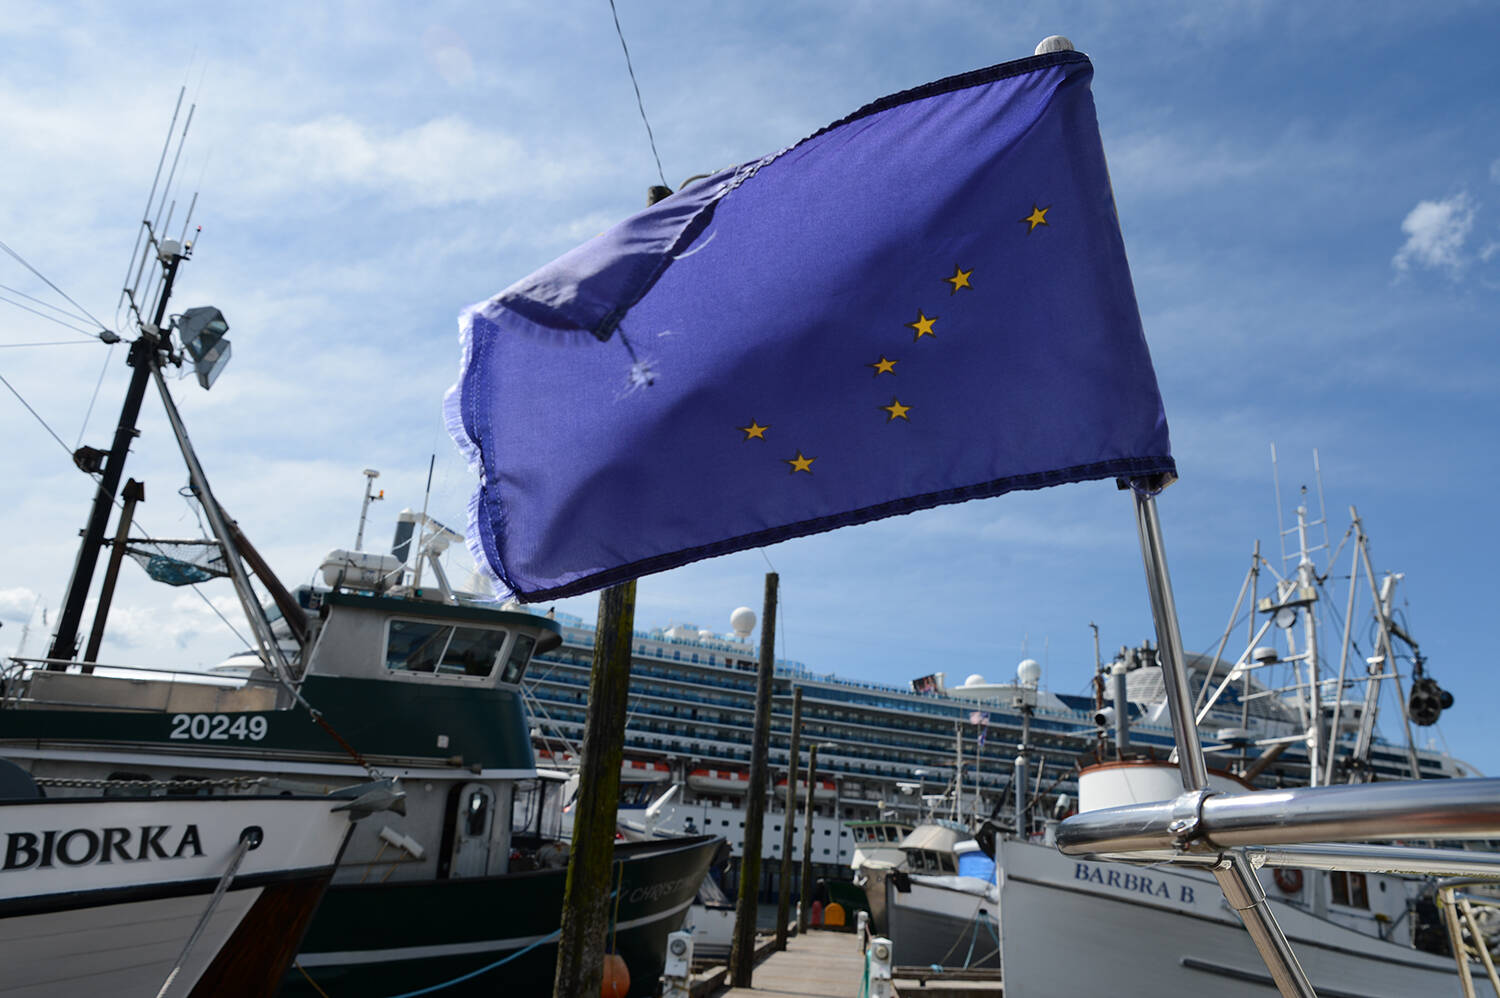 The Alaska flag flies from the bow of a boat in one of Ketchikan’s small-boat harbors on July 24. (Photo by James Brooks/Alaska Beacon)